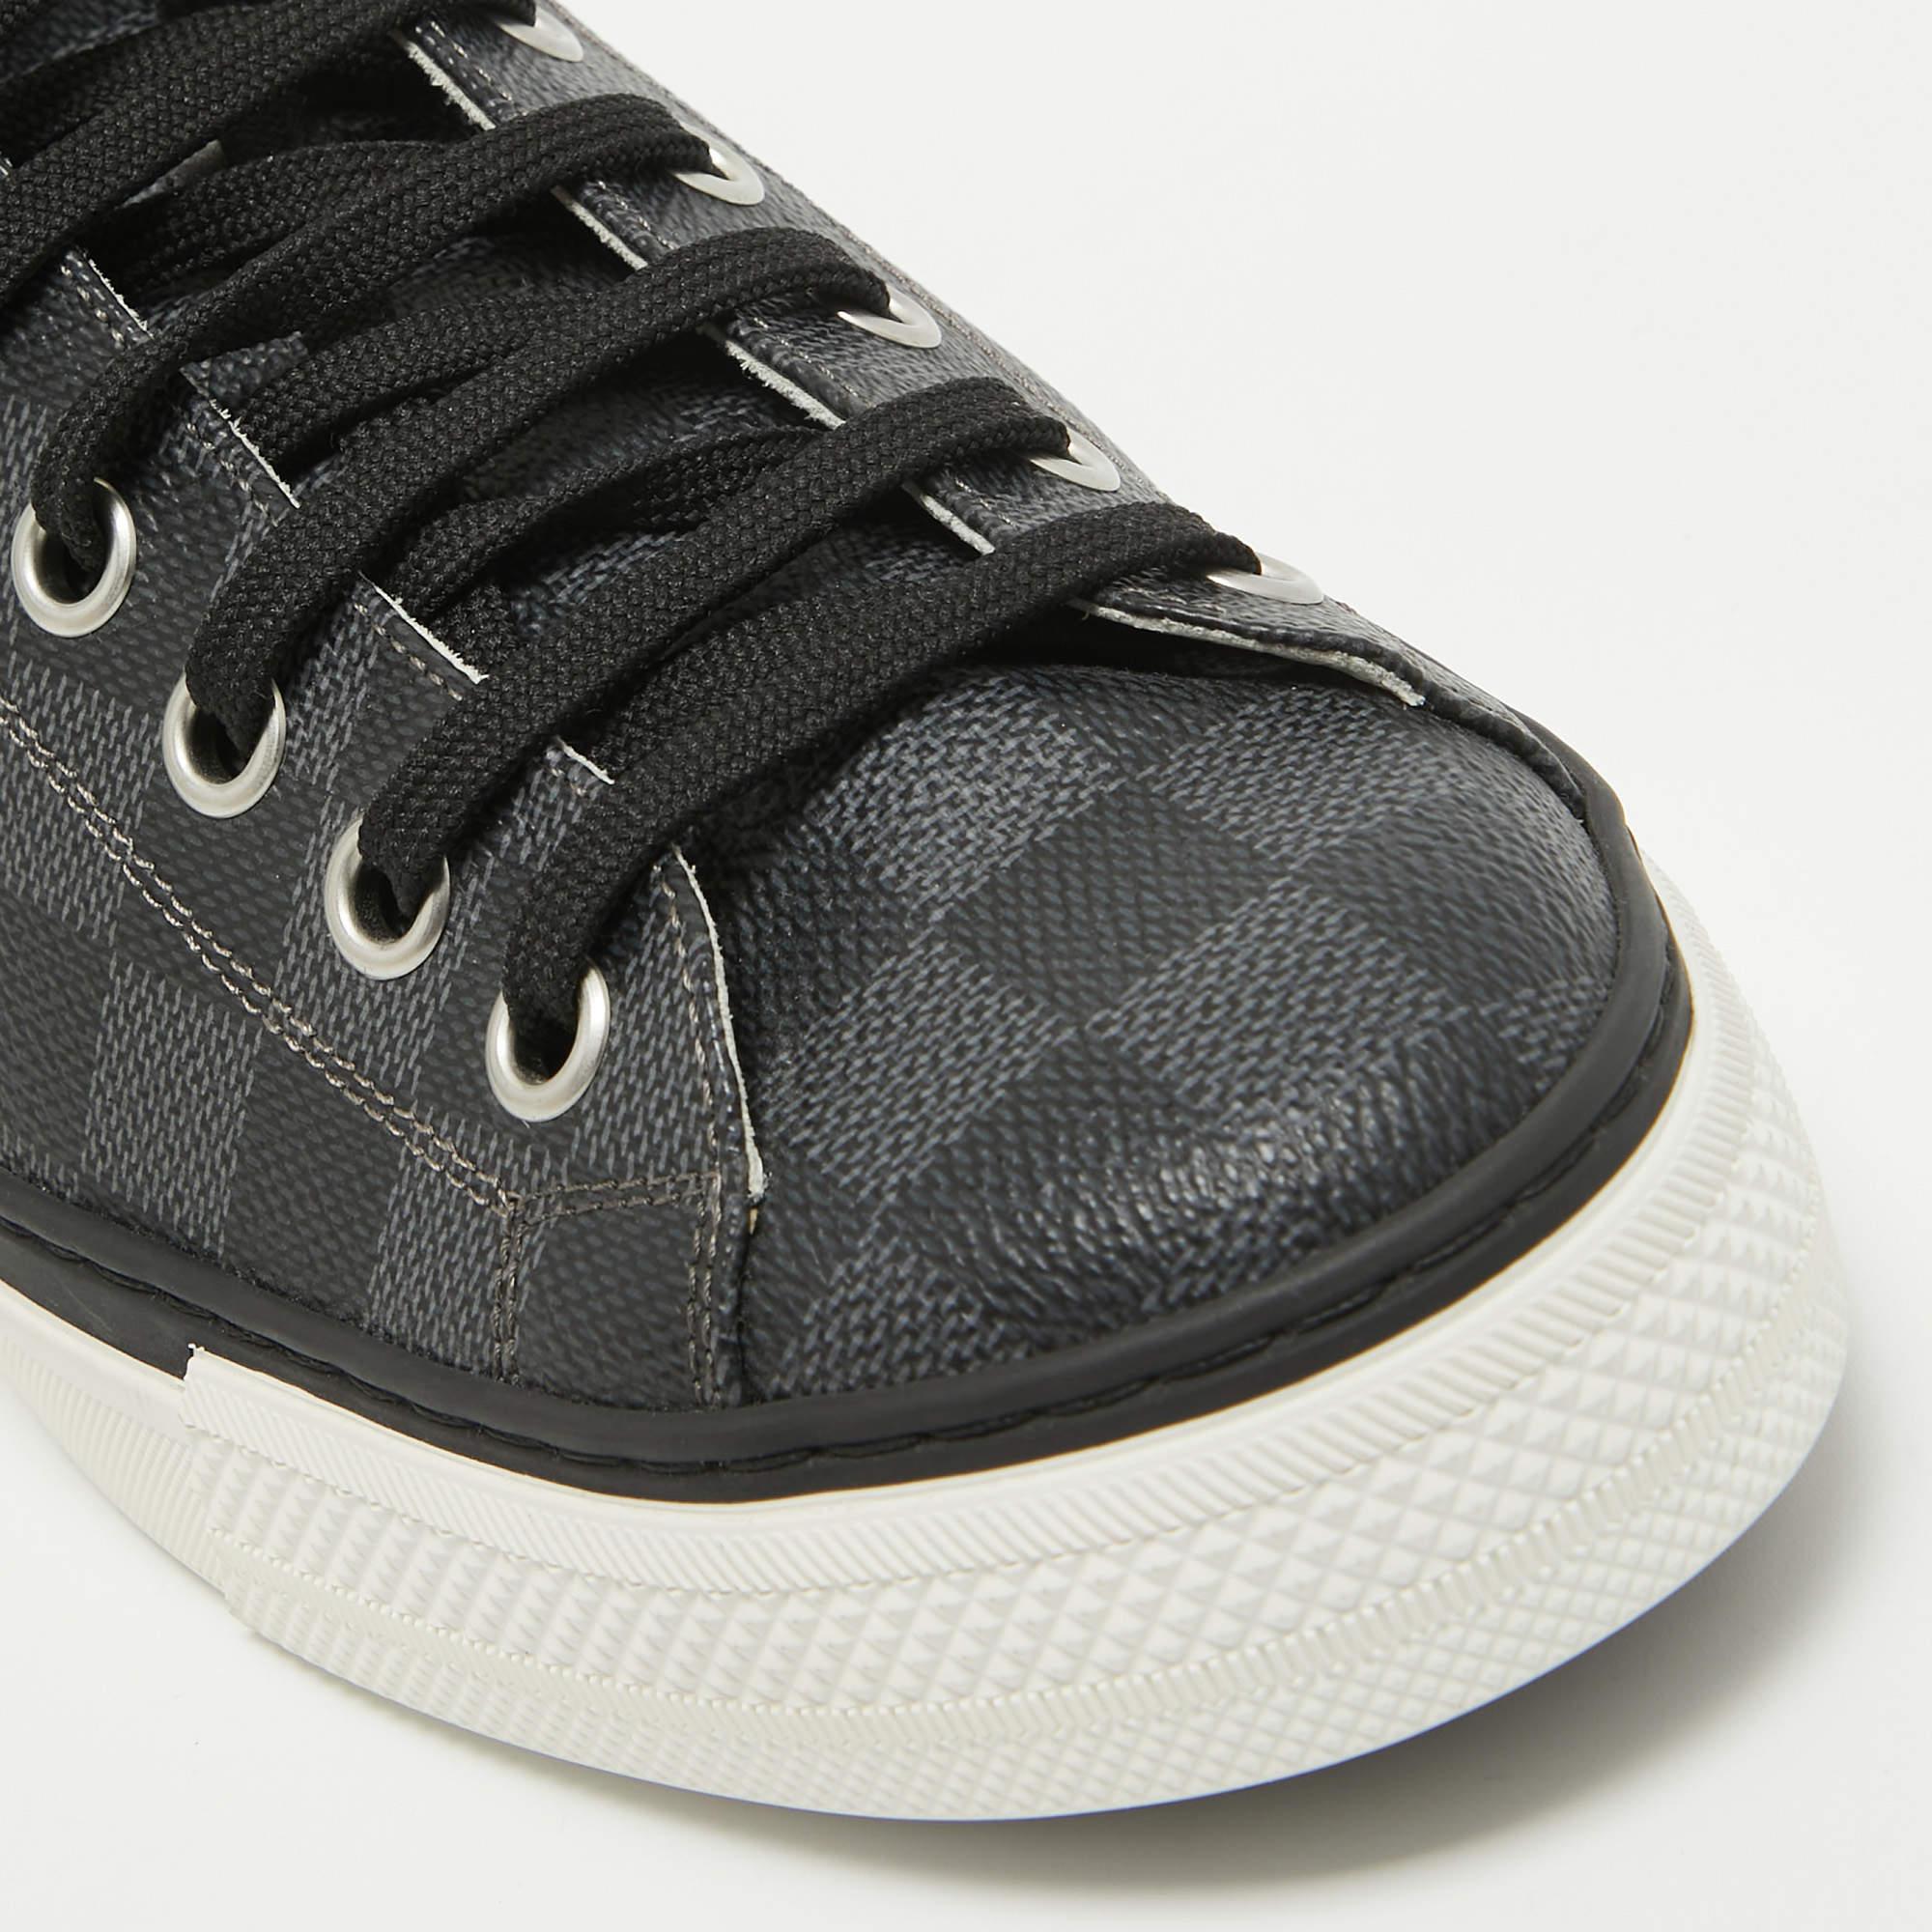 Louis Vuitton Black Canvas and Suede Graphite Low Top Sneakers Size 42.5 For Sale 2